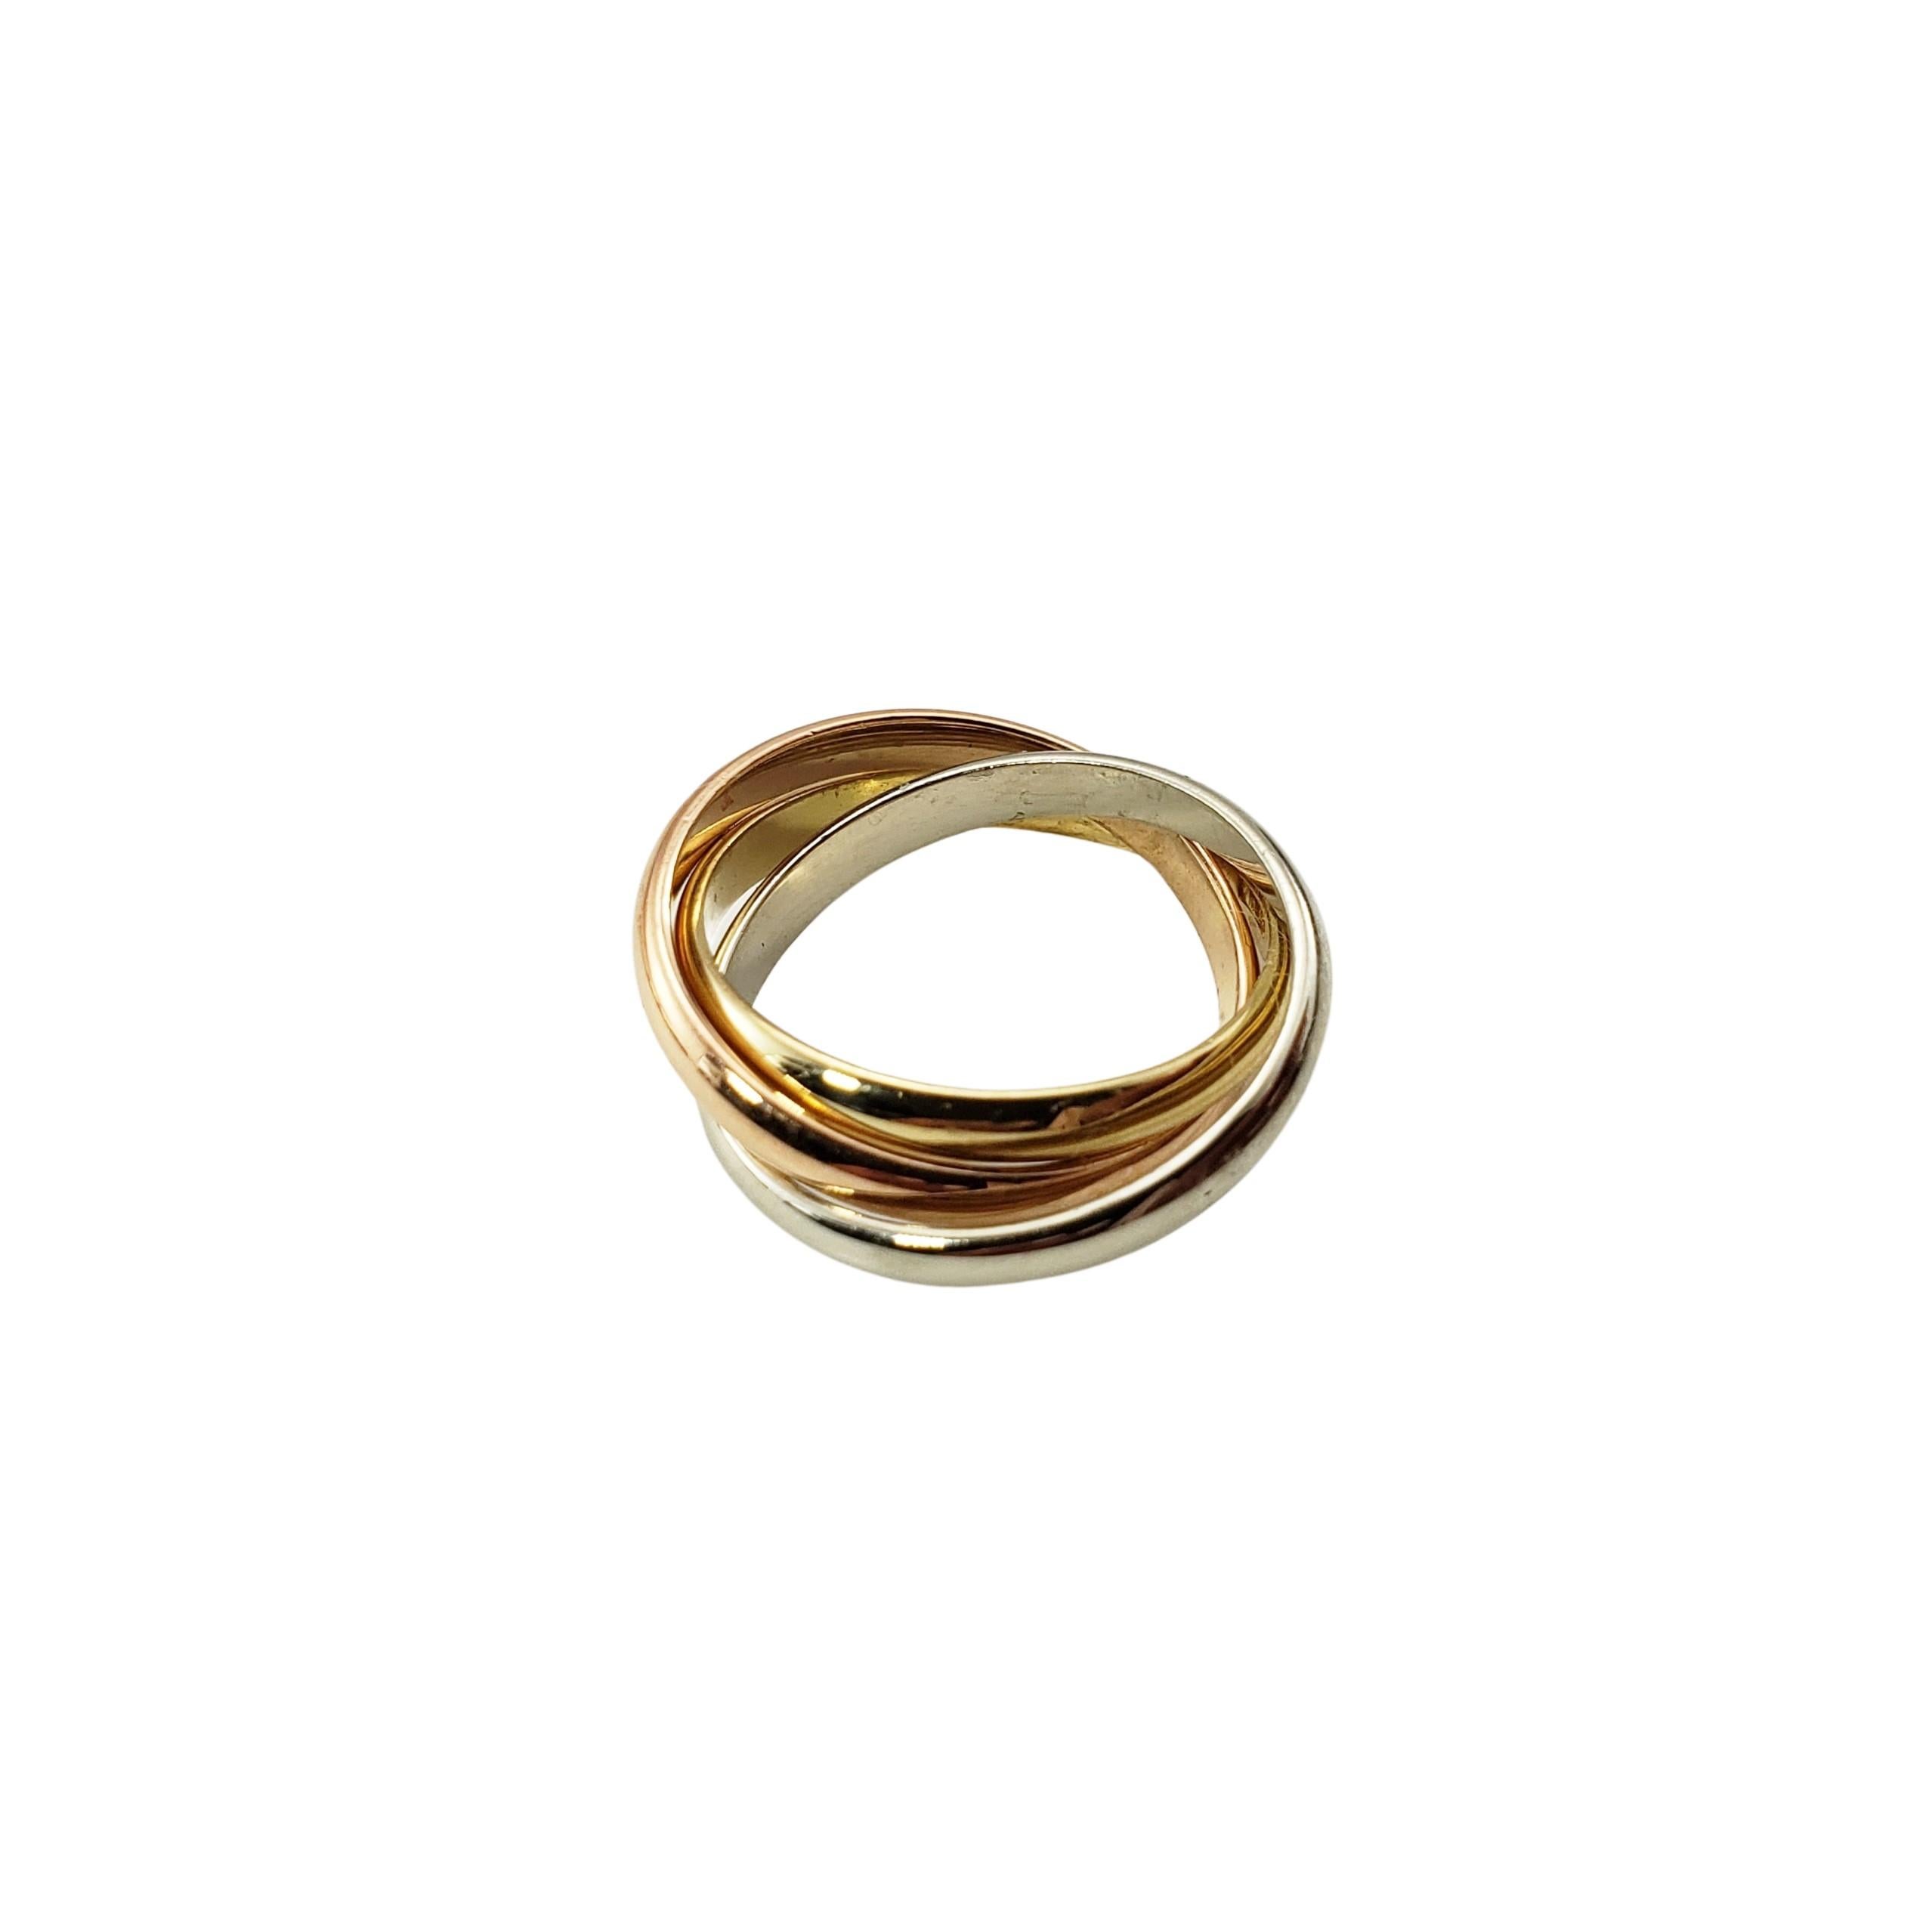 18 Karat Tricolor Rolling Ring-

This classic rolling ring features a trio of connected bands crafted in 18K yellow, white and rose gold.
Width of each band:  3 mm.

Ring Size: 6

Weight:  6.2 dwt. /  4.0 gr.

Stamped: 750  110  AR

Very good